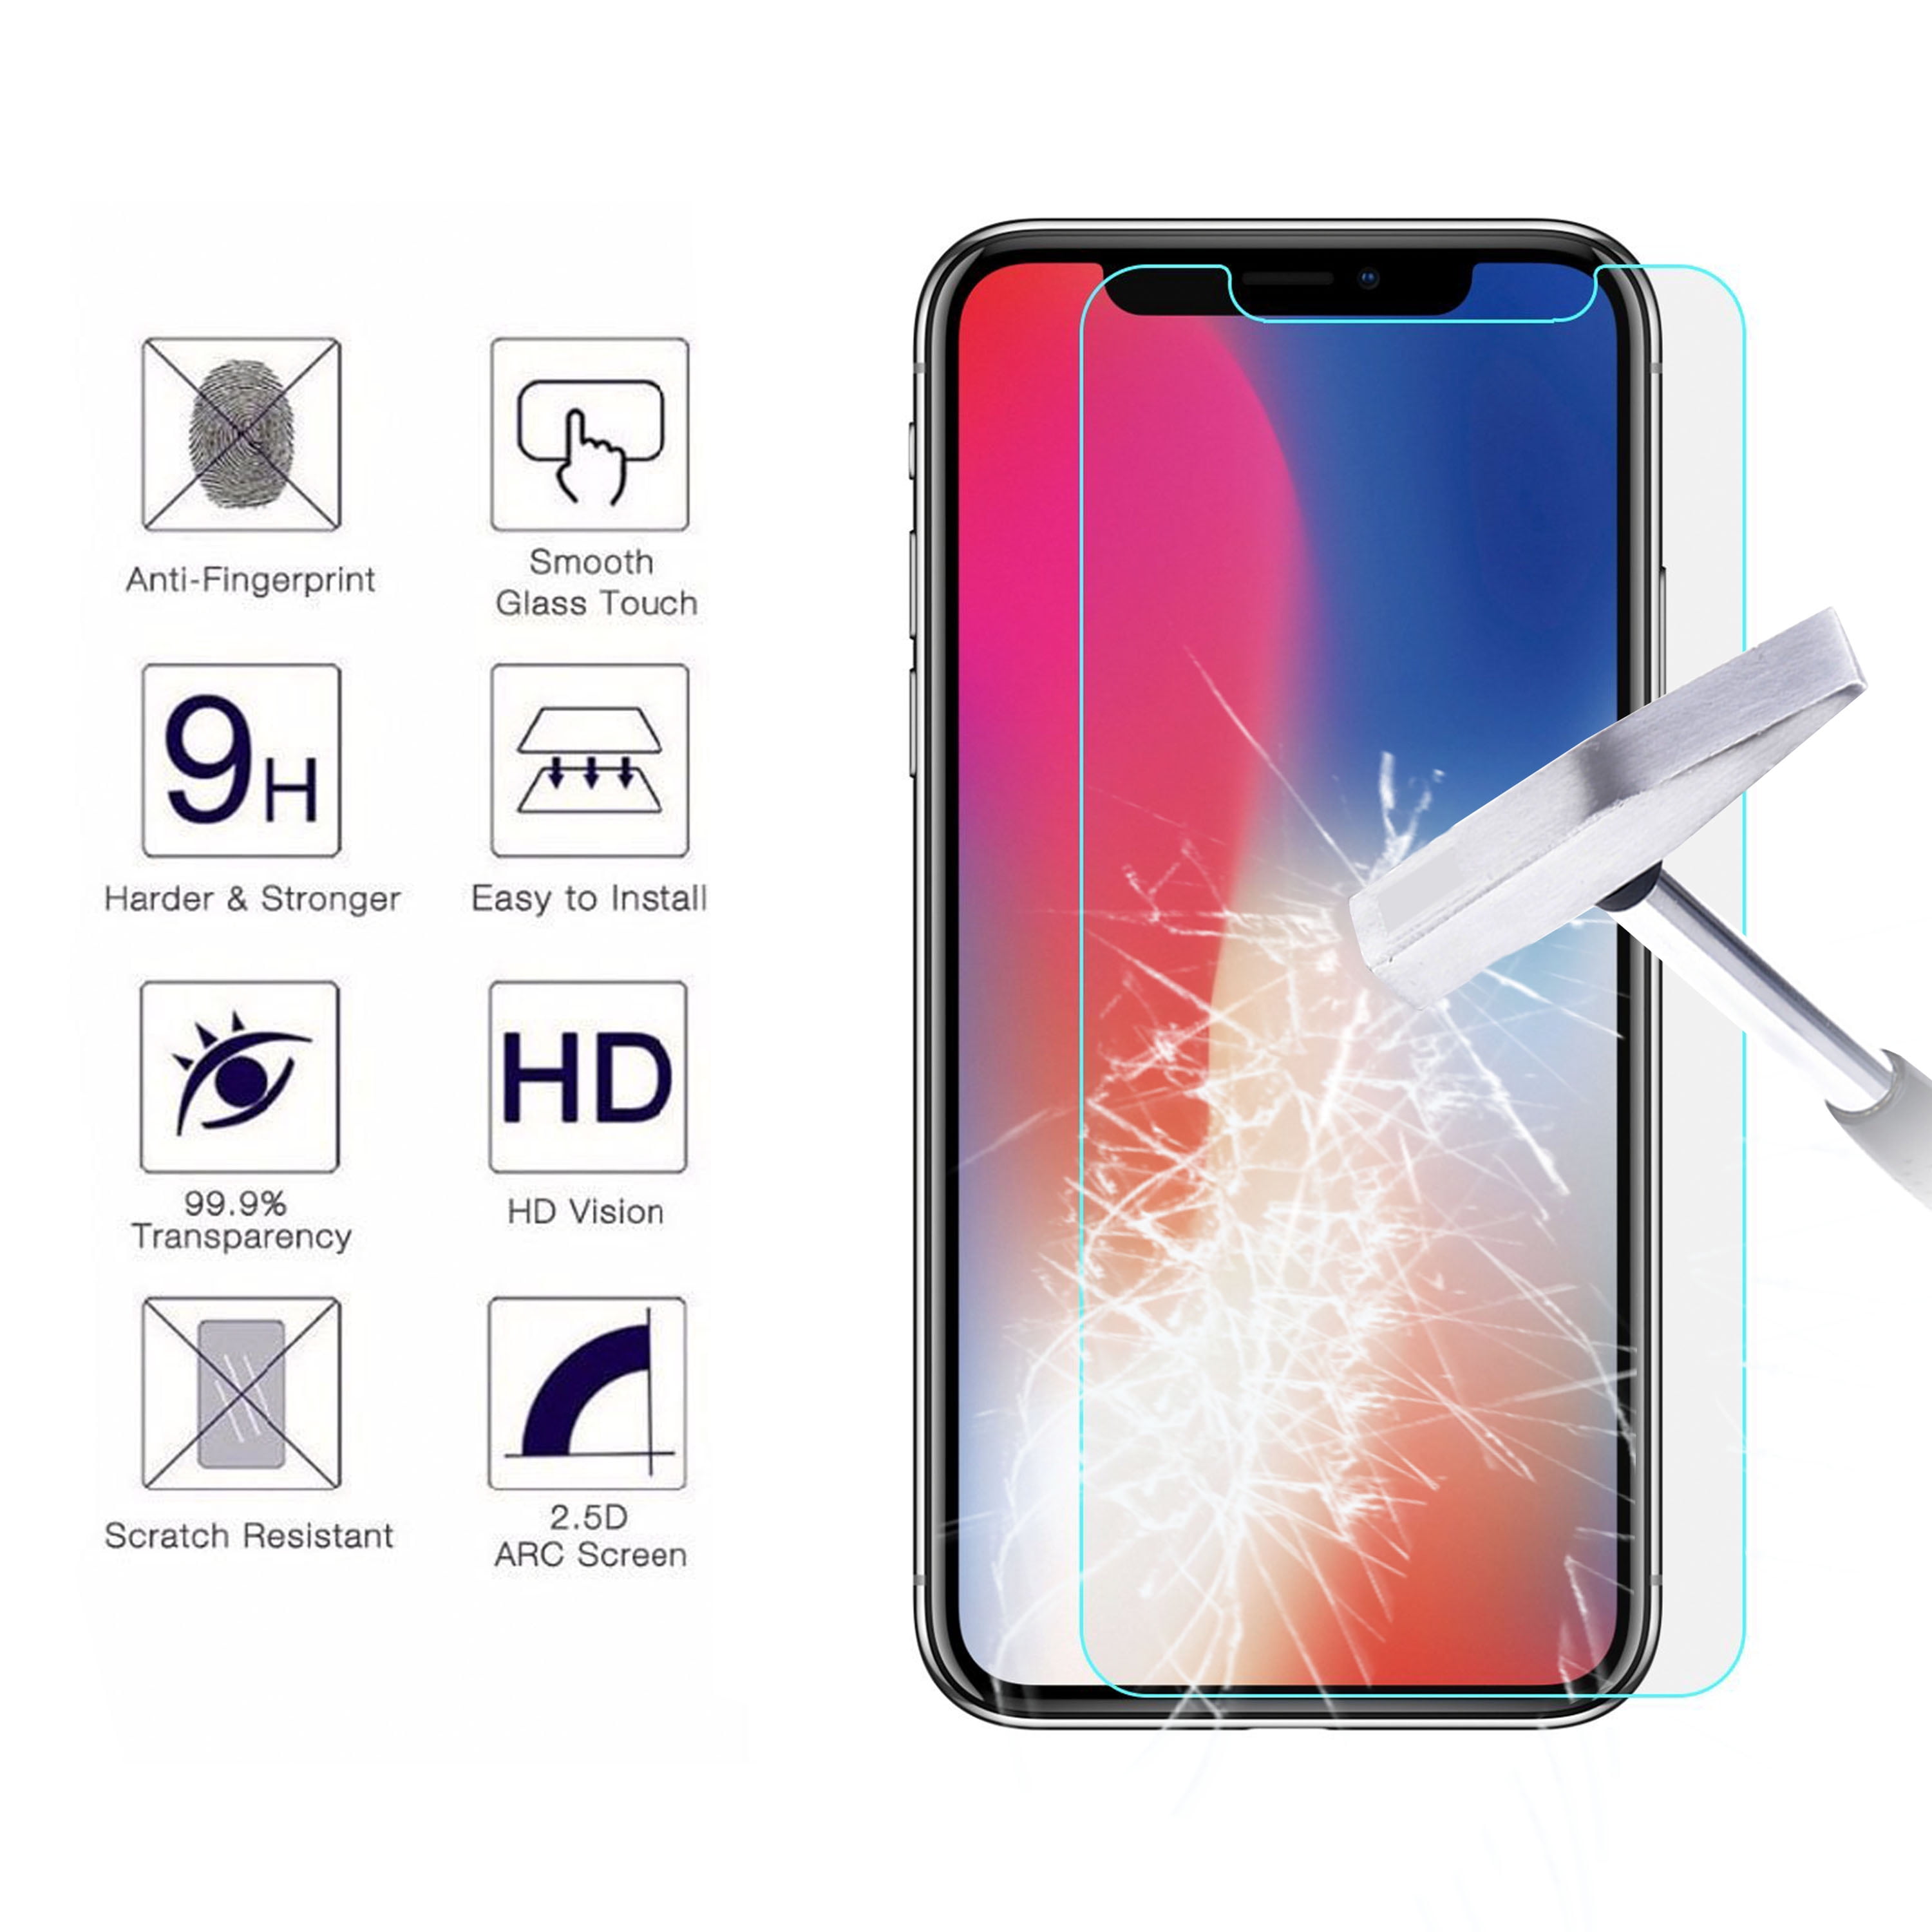 Tempered Glass Screen Protector High Definition Screen Protector Glass 3pcs iPhone X/XS Screen Protector